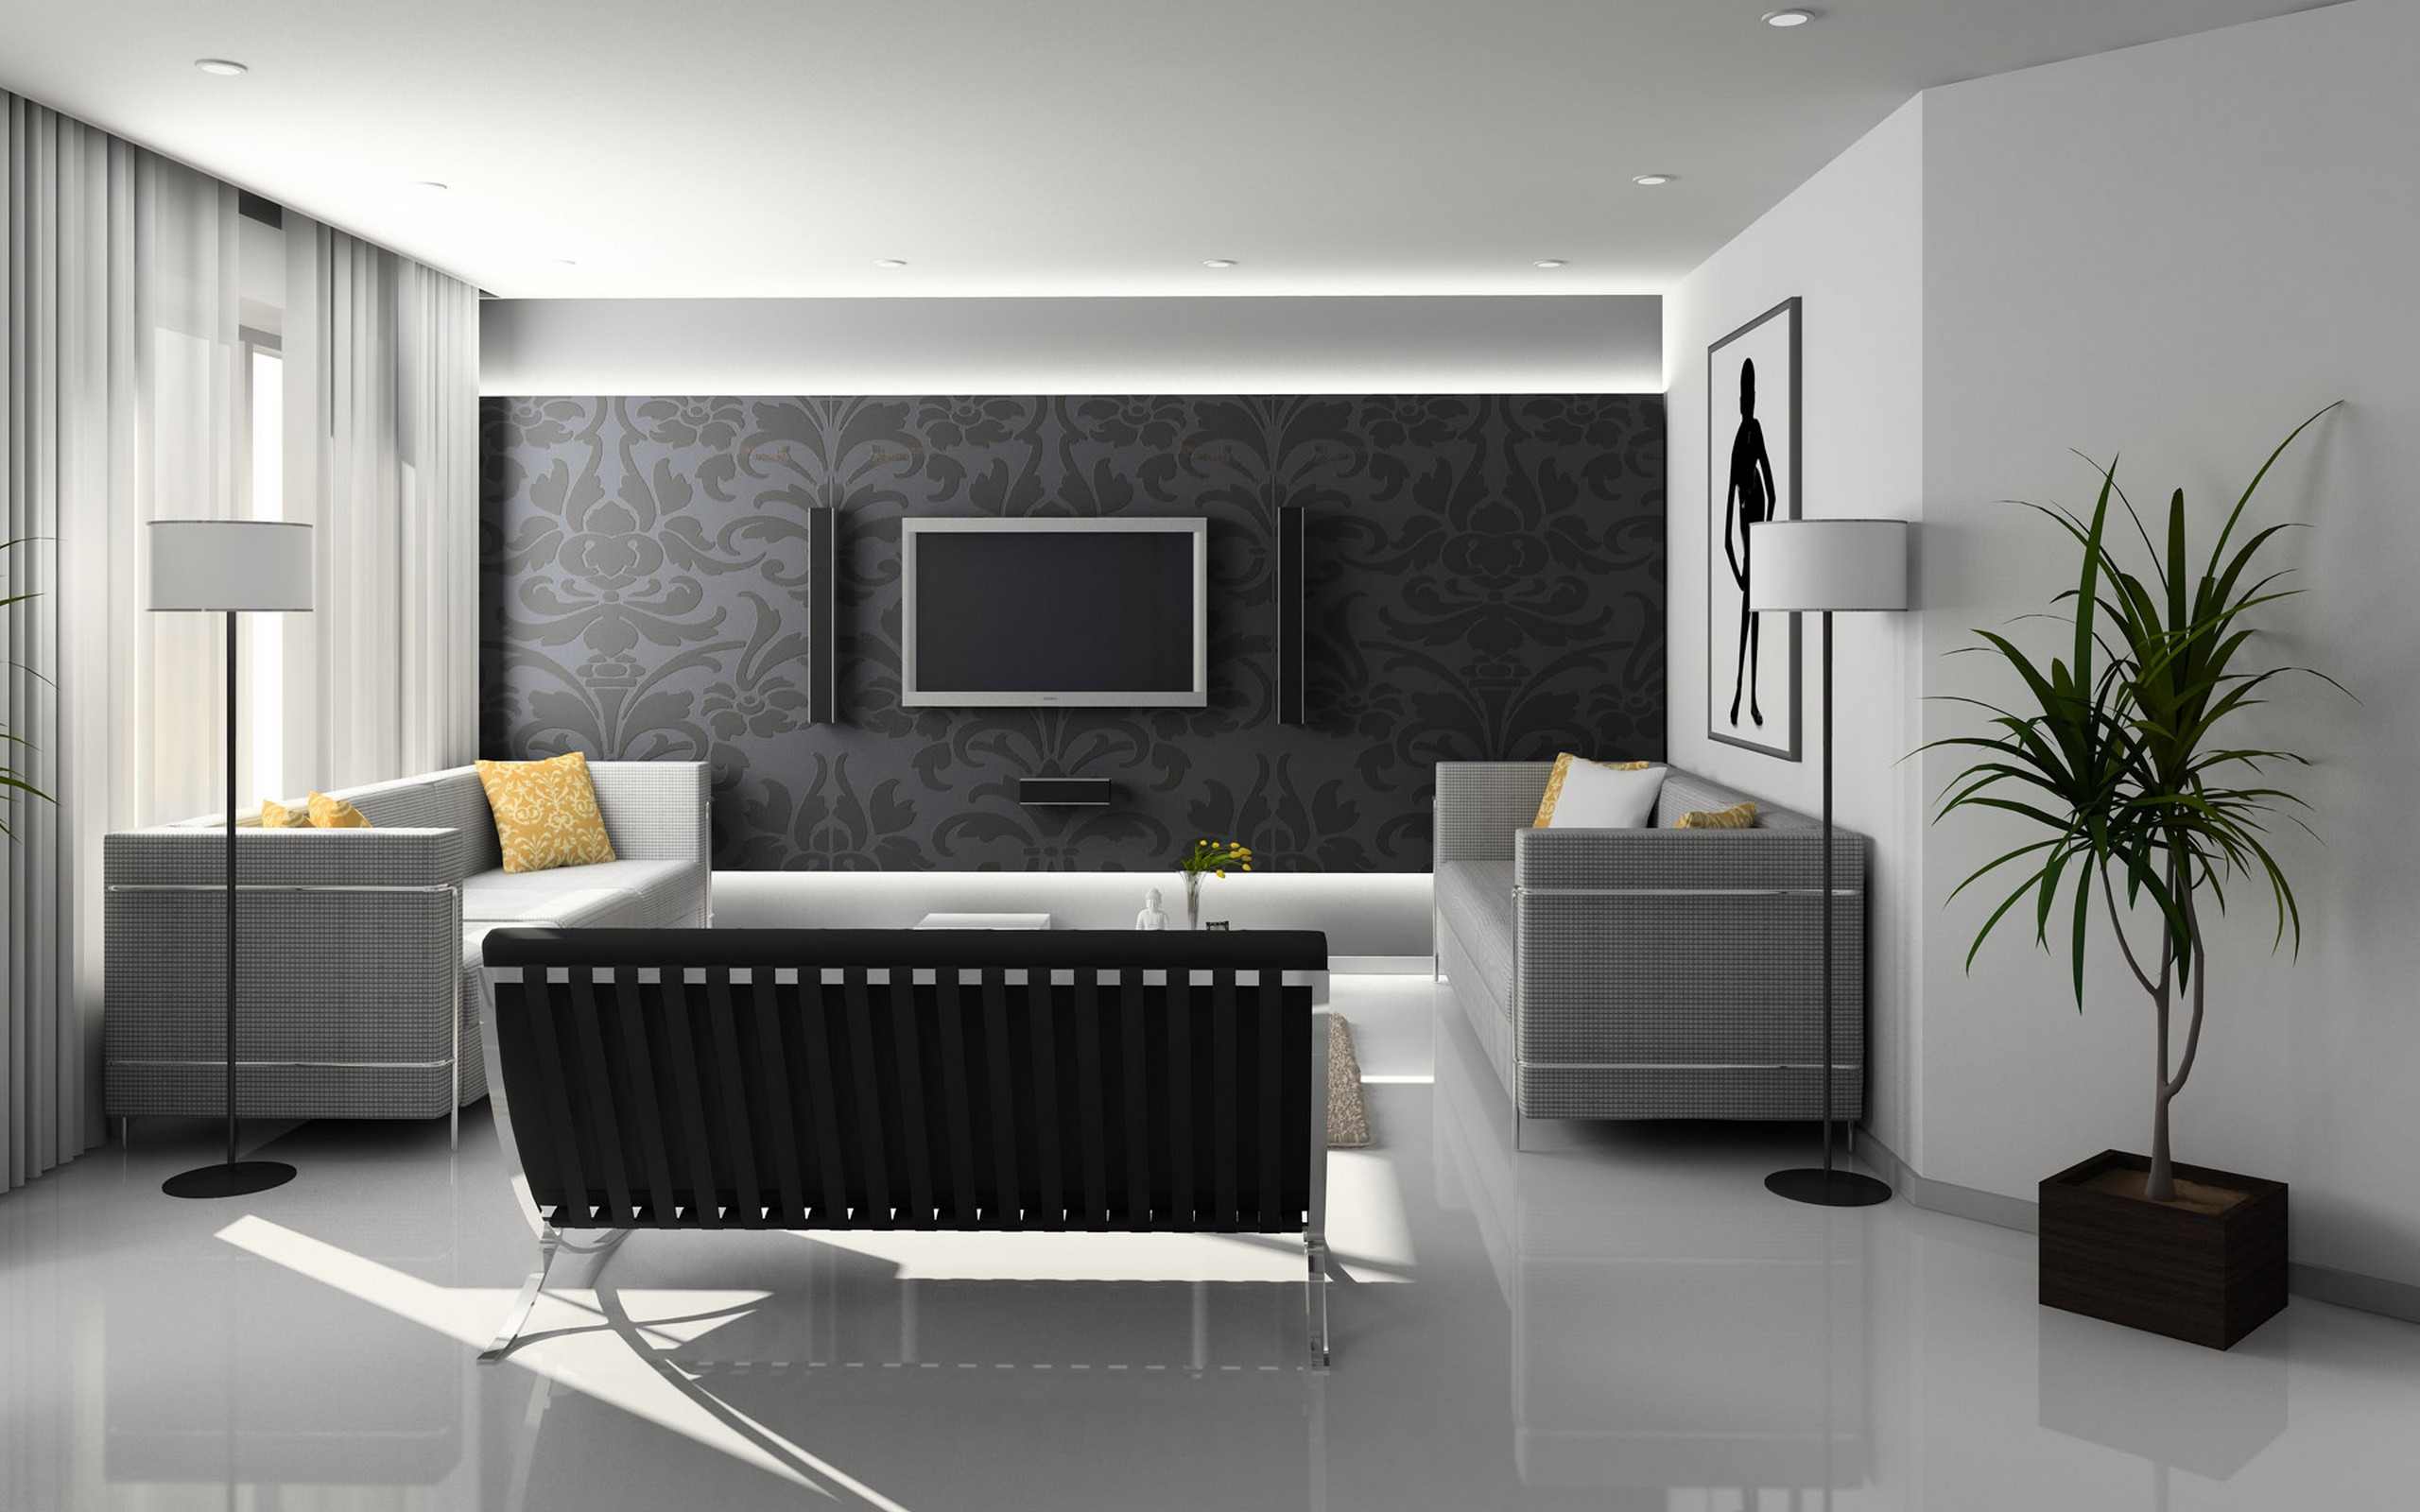 Wallpaper Designs For Living Room
 Wallpaper Design For Living Room that Can Liven Up The